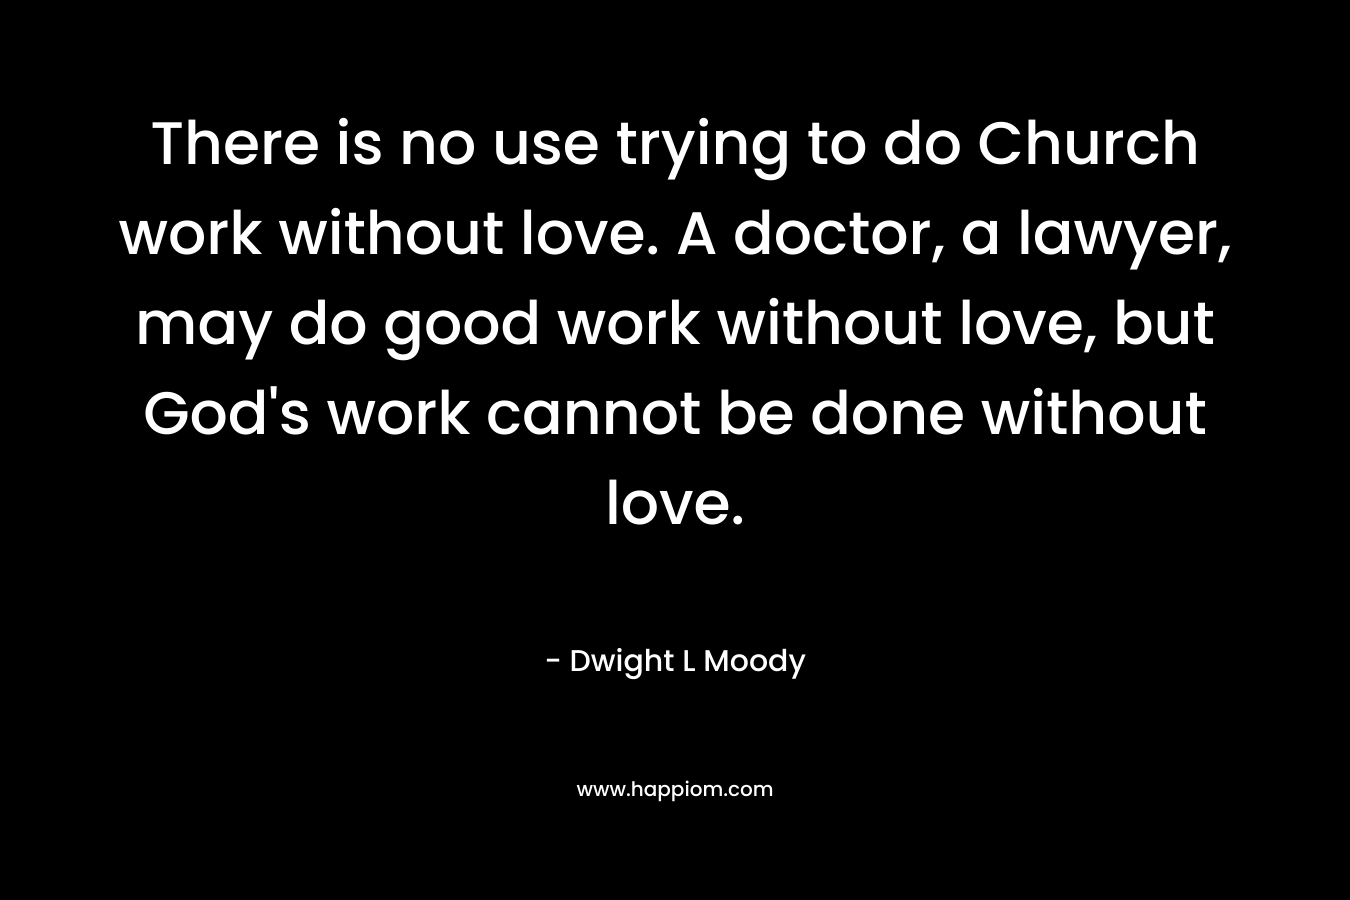 There is no use trying to do Church work without love. A doctor, a lawyer, may do good work without love, but God’s work cannot be done without love. – Dwight L Moody